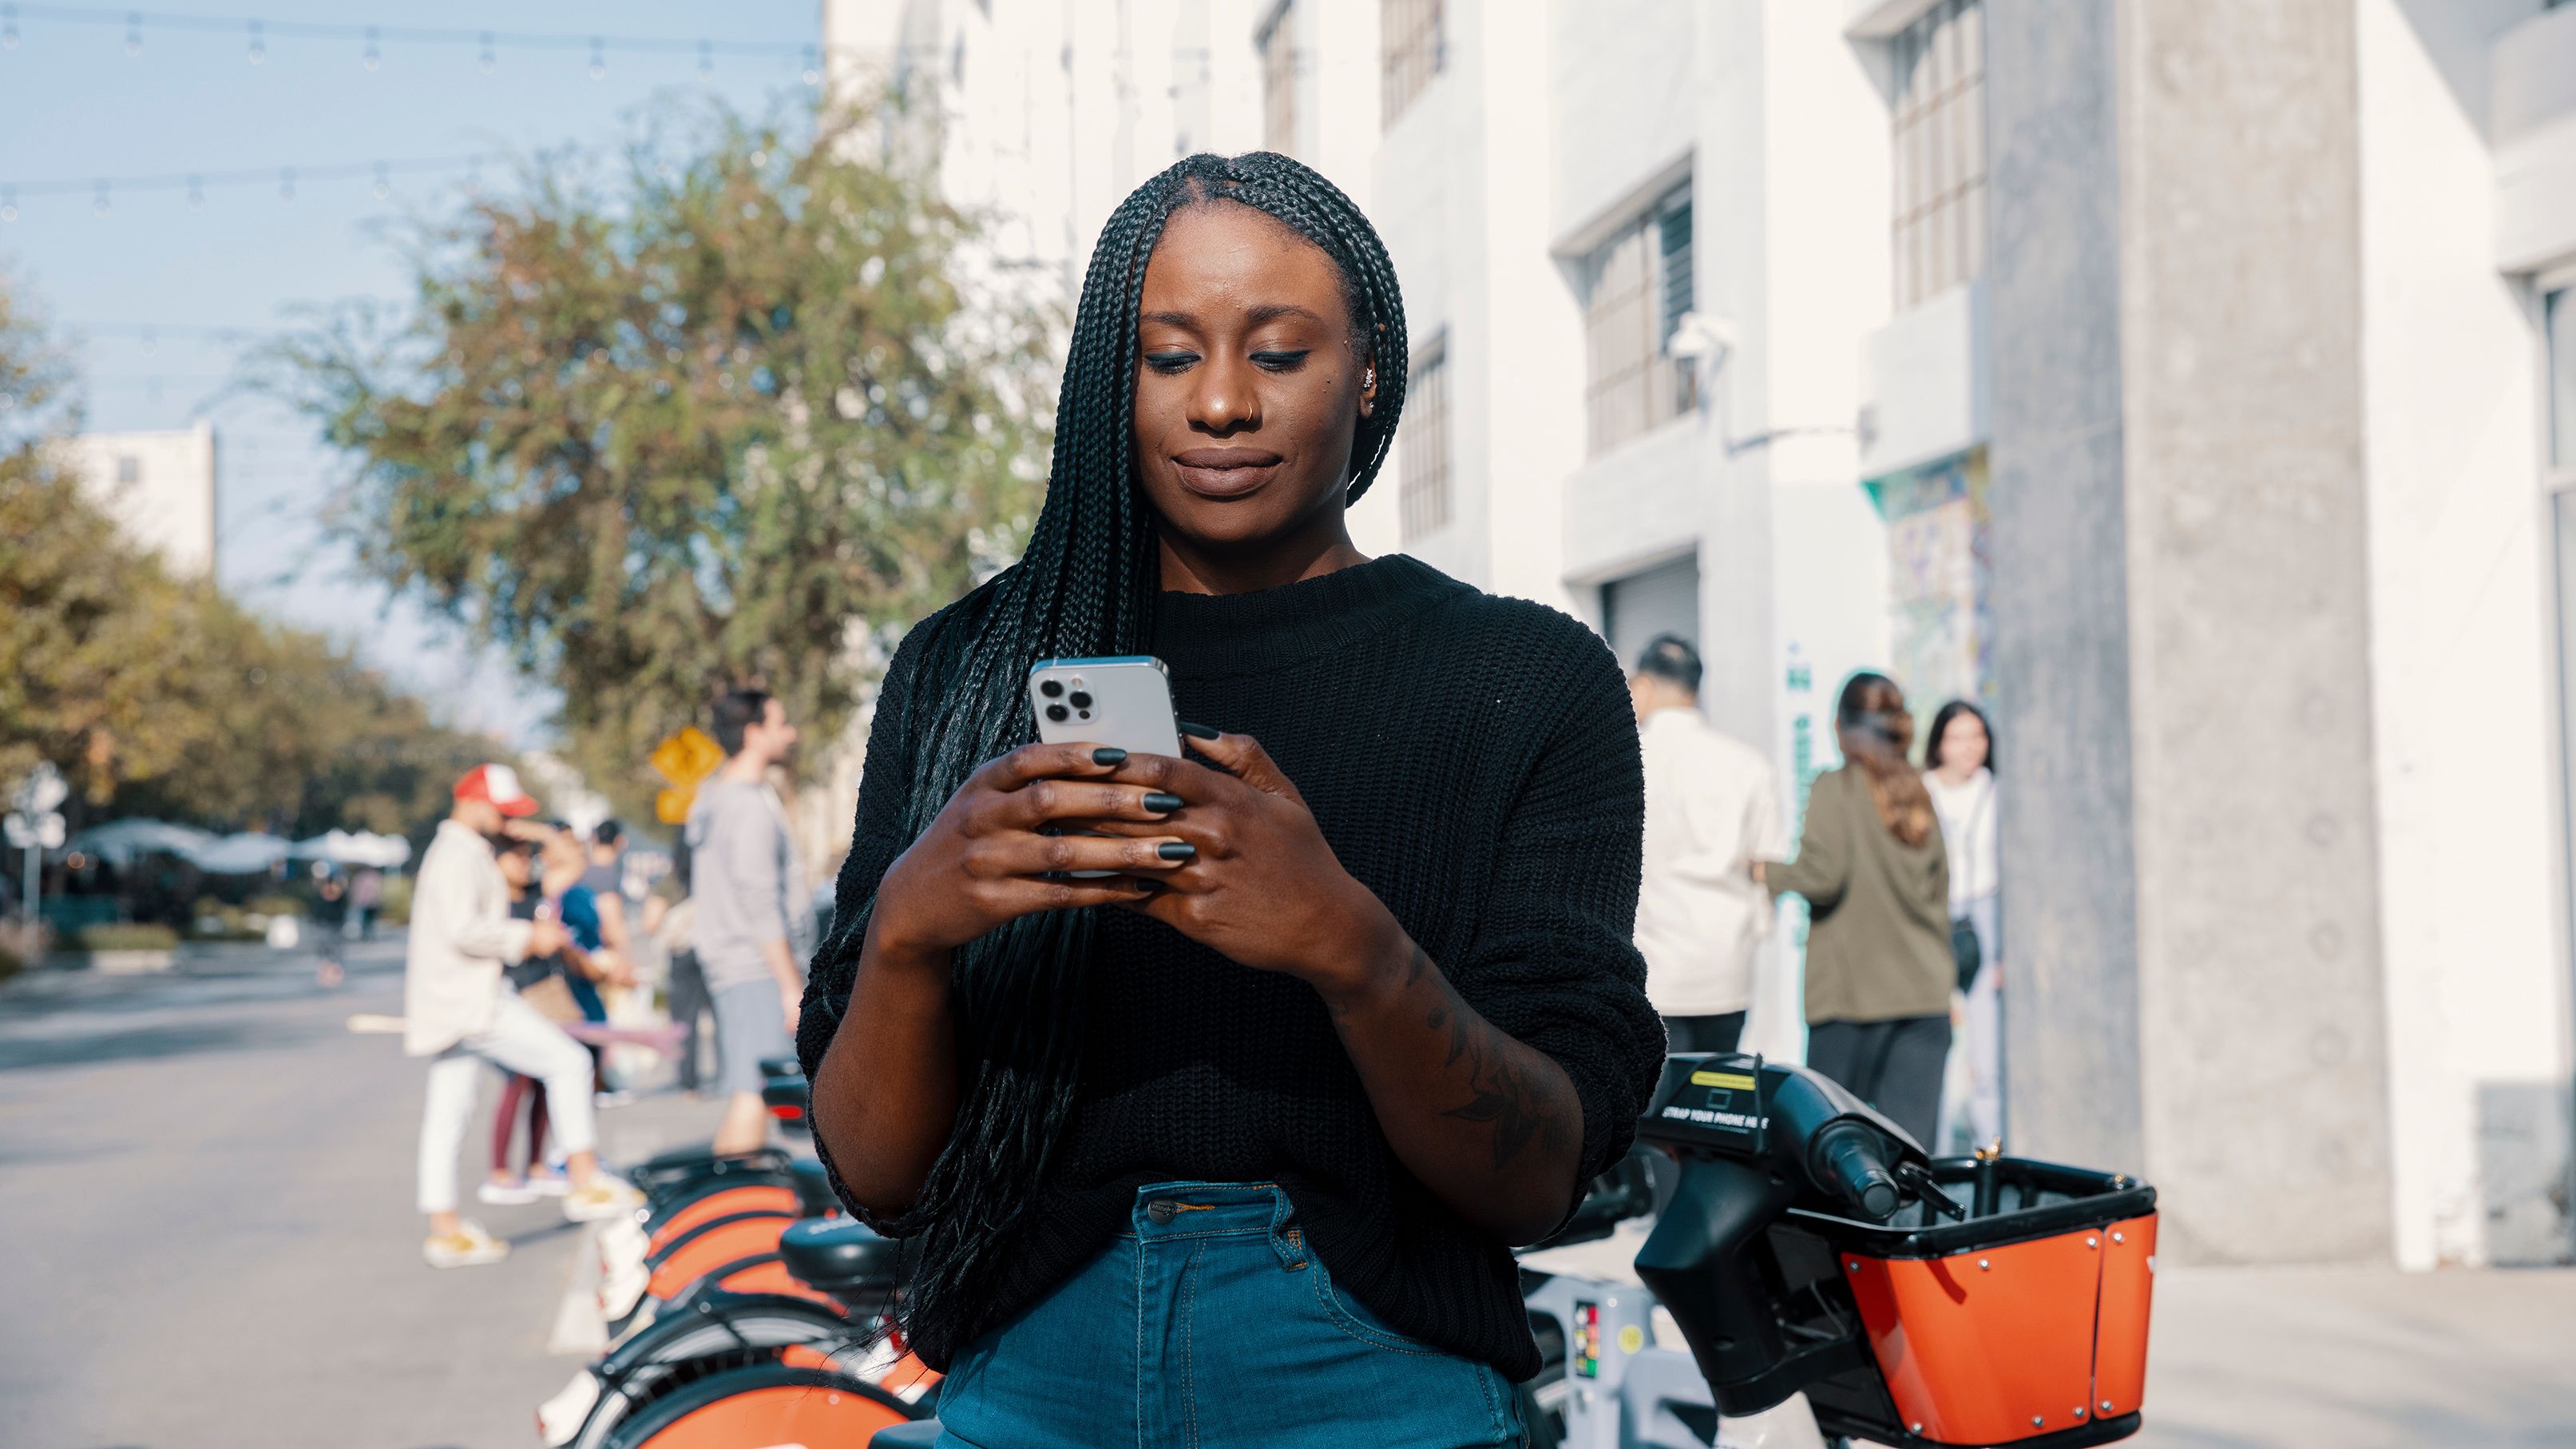 A person stands on a road in front of bicycles while looking at their mobile device.